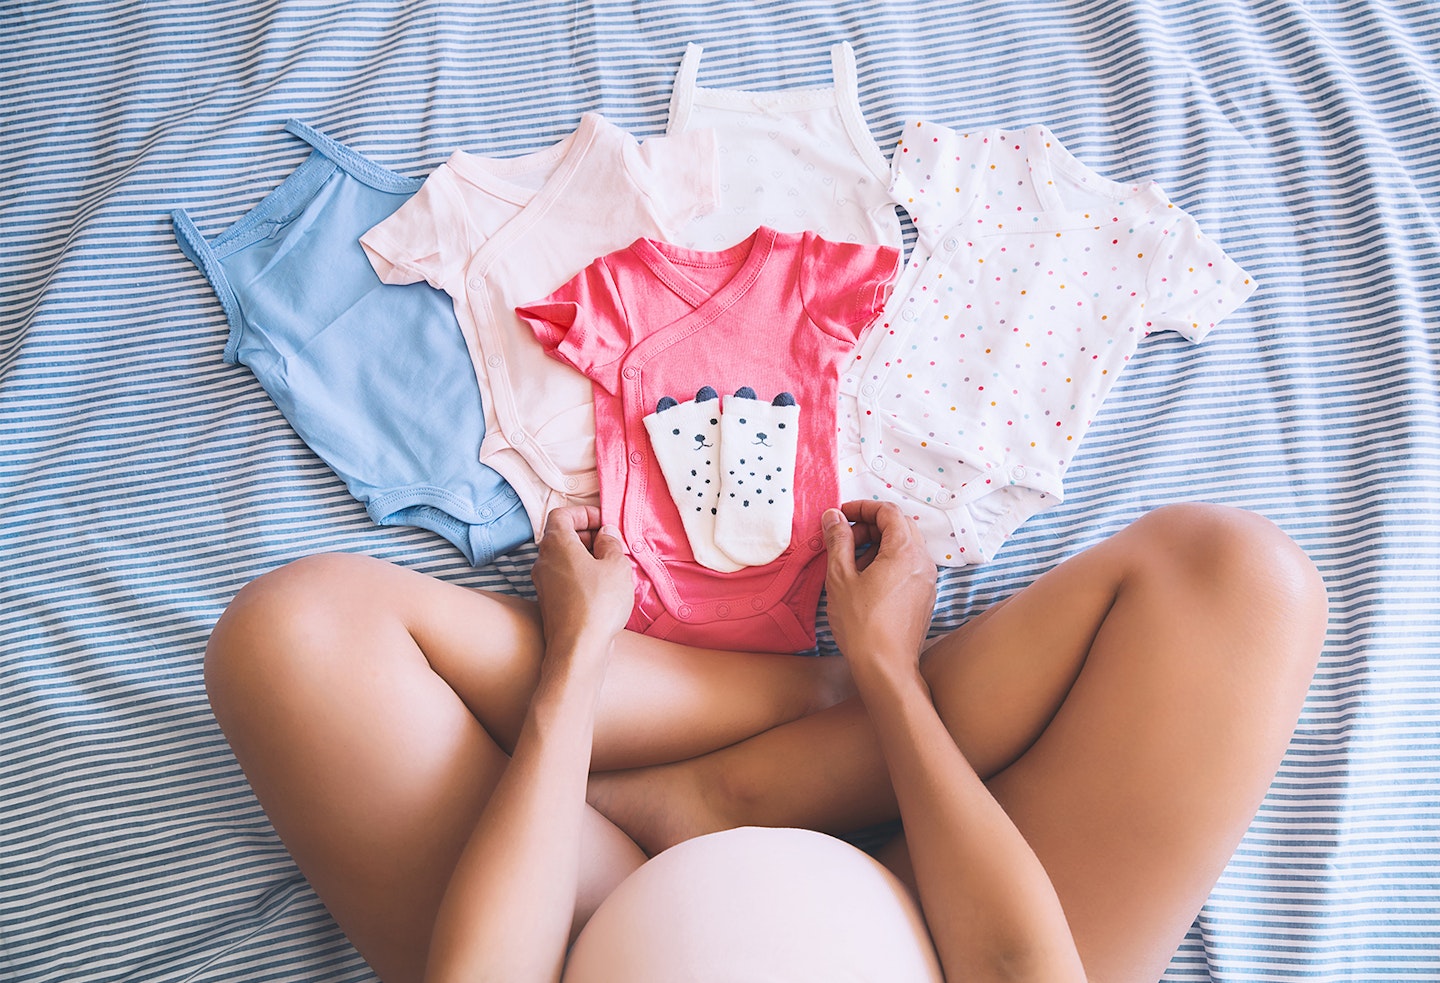 Forget a birth plan, here’s how to really reclaim your birth experience